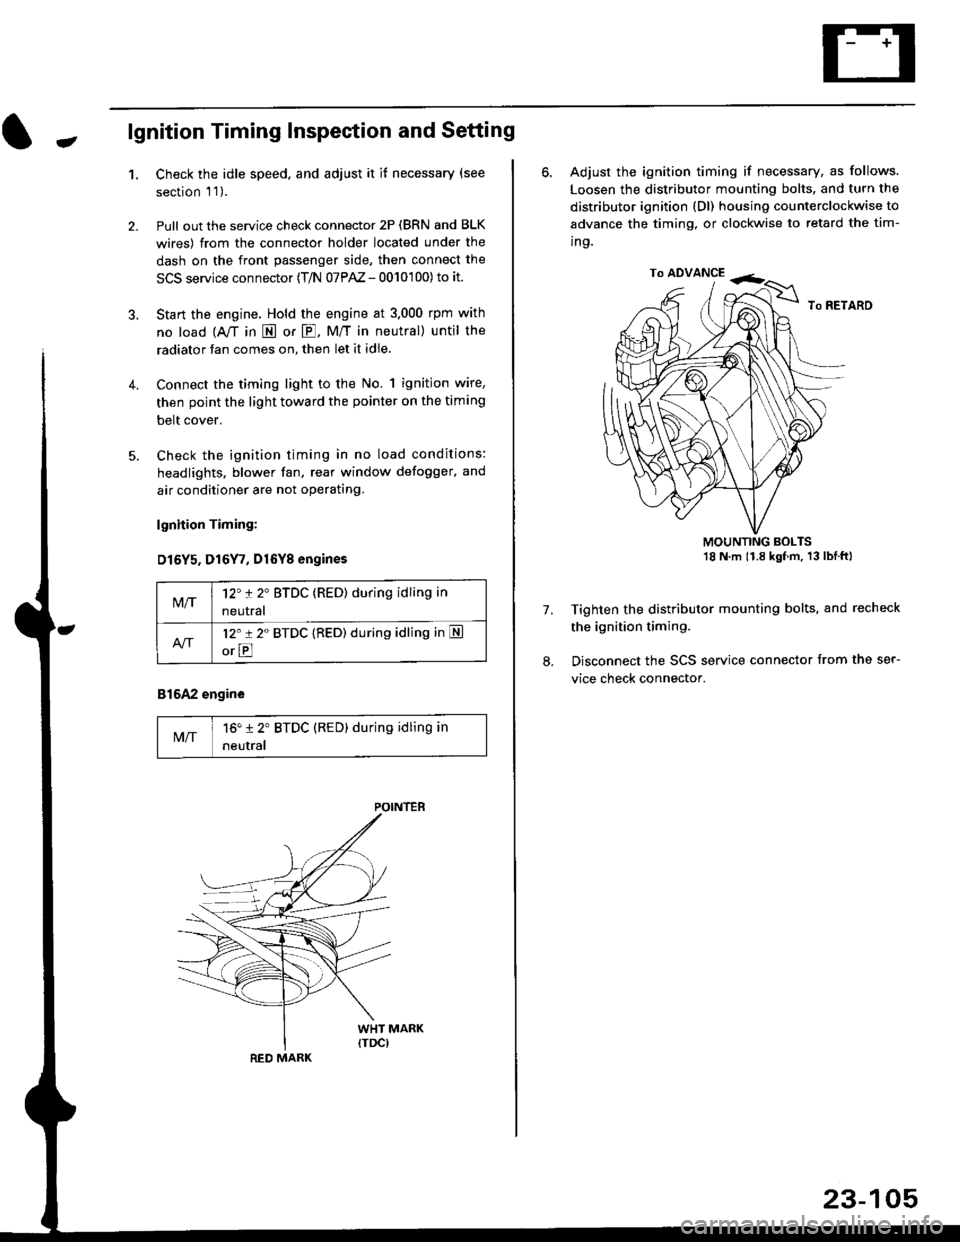 HONDA CIVIC 1996 6.G Workshop Manual -lgnition Timing Inspection and Setting
1.Check the idle speed, and adjust it it necessary (see
section l 1 ).
Pull out the service check connector 2P (BRN and BLK
wires) from the connector holder l